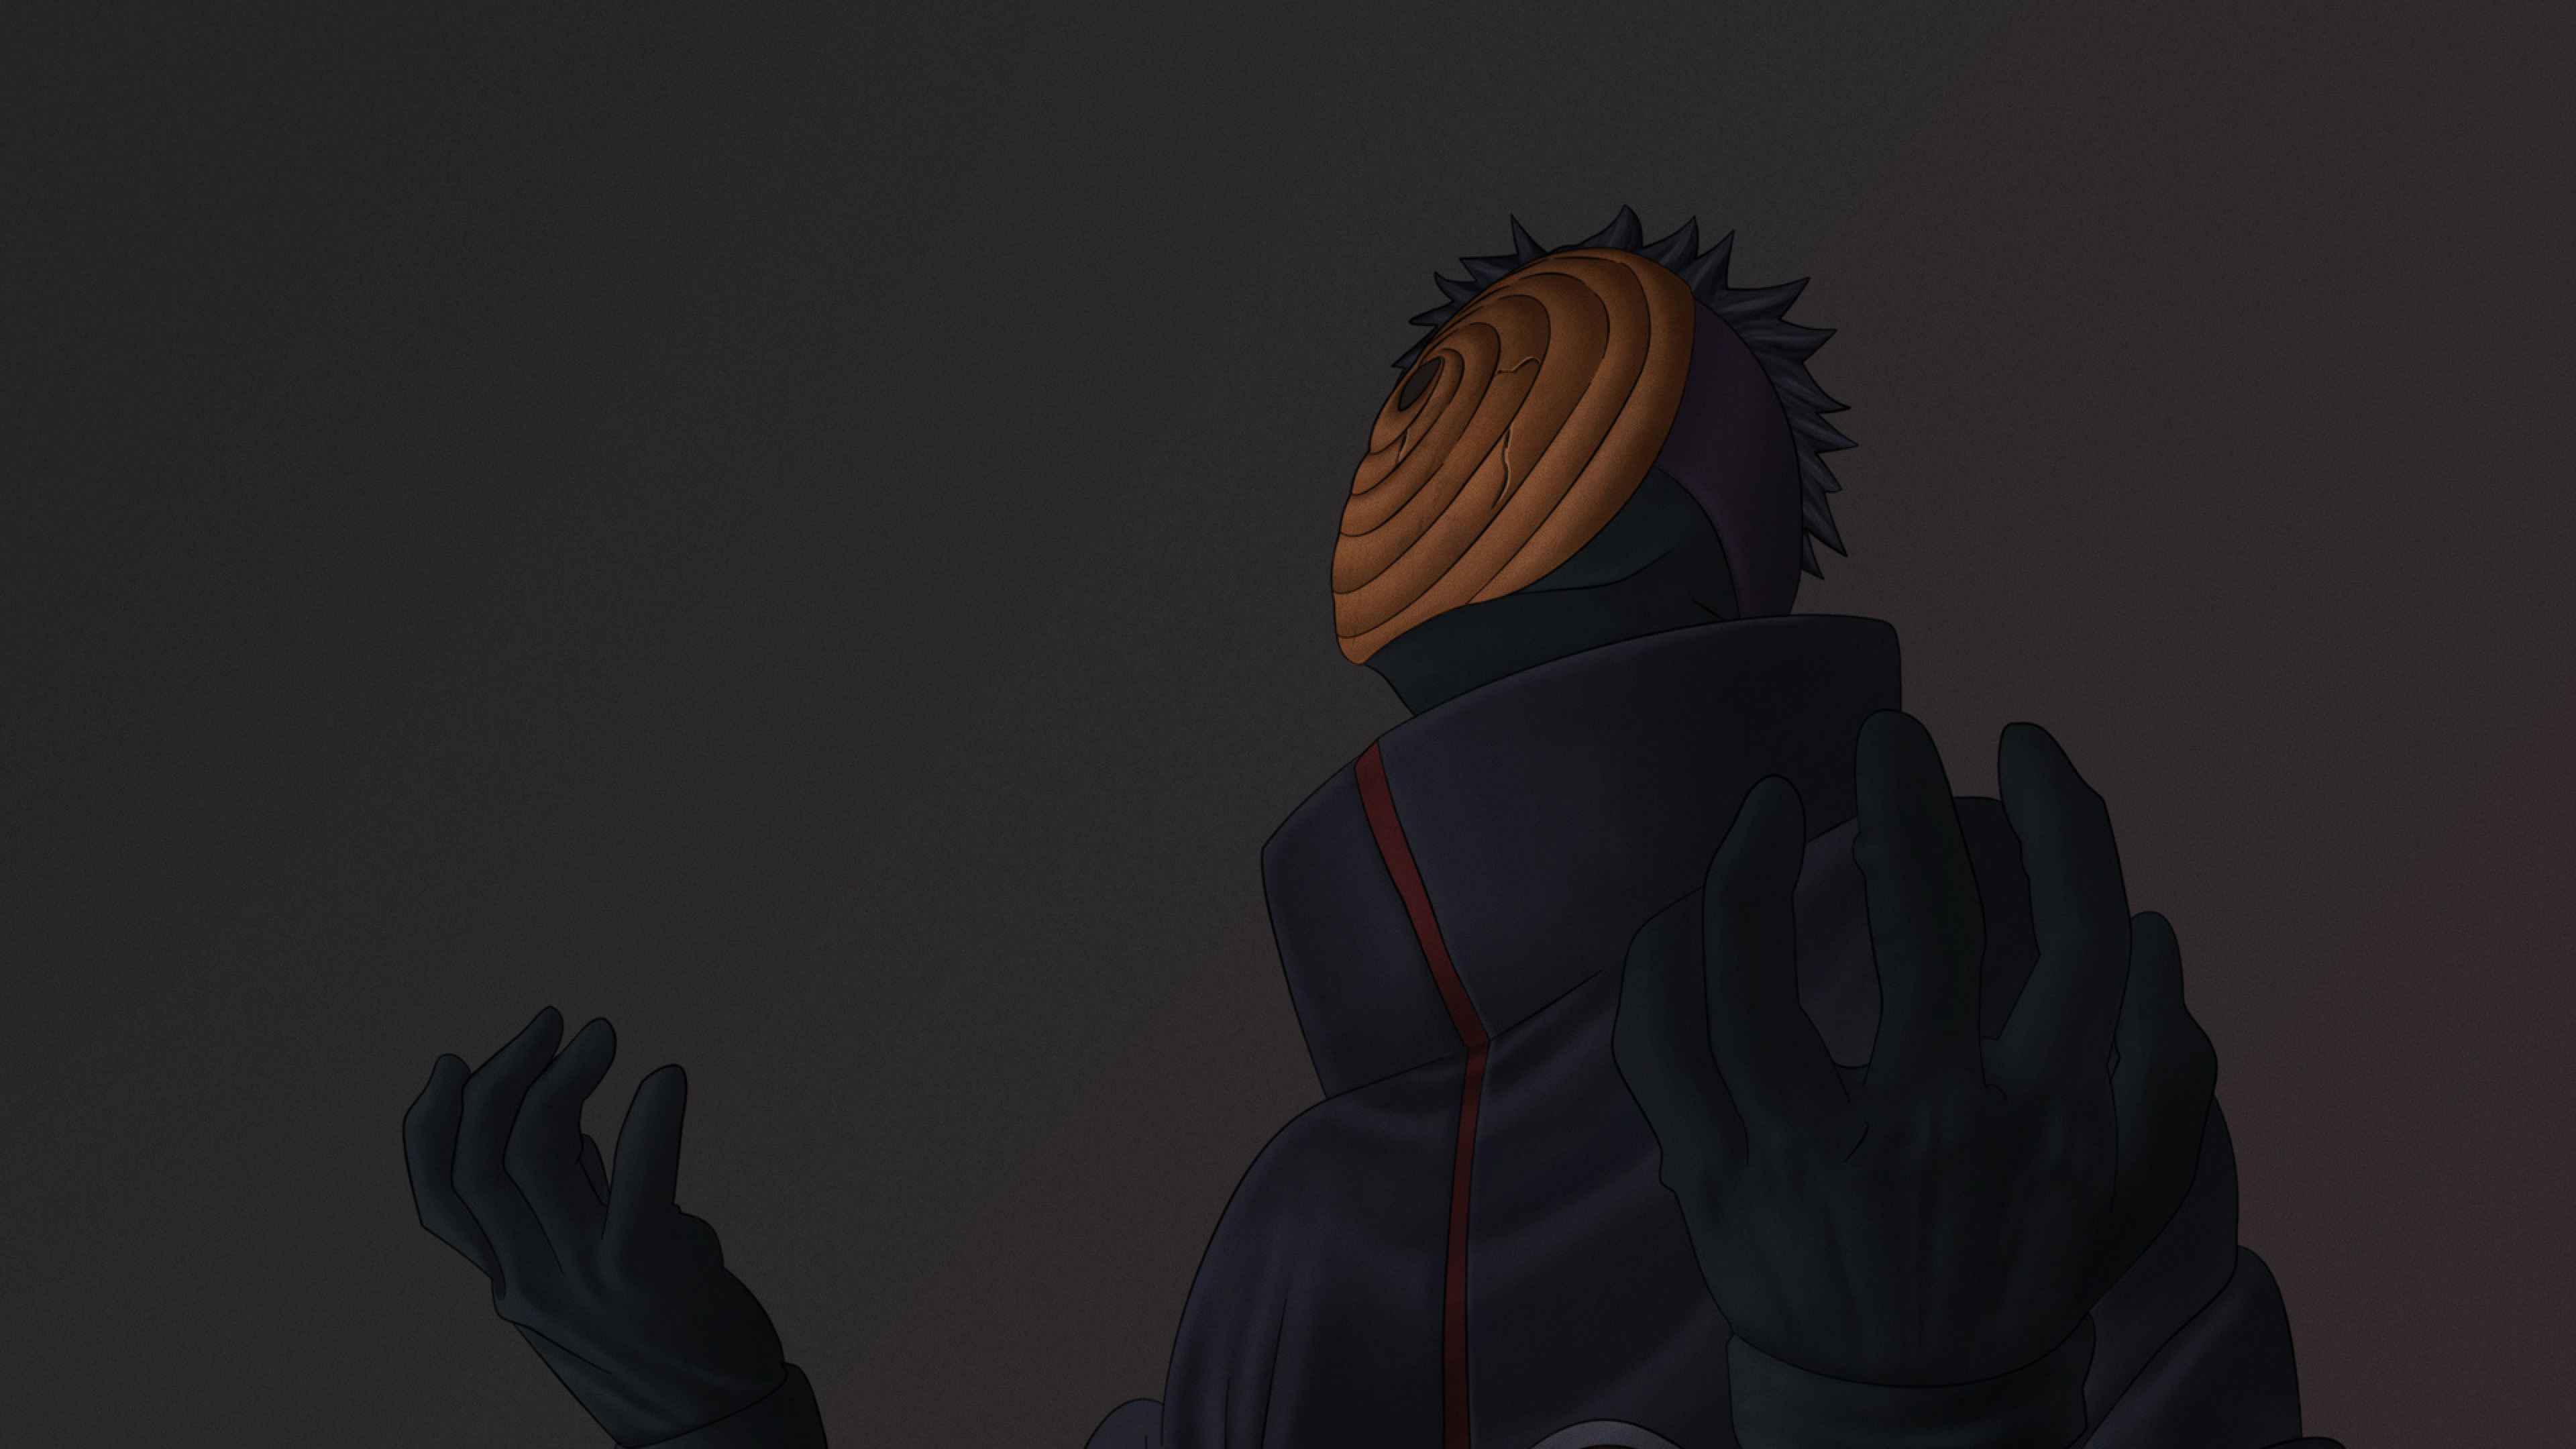 Obito Uchiha Wallpaper Hd Anime 4k Wallpapers Images And Background ...